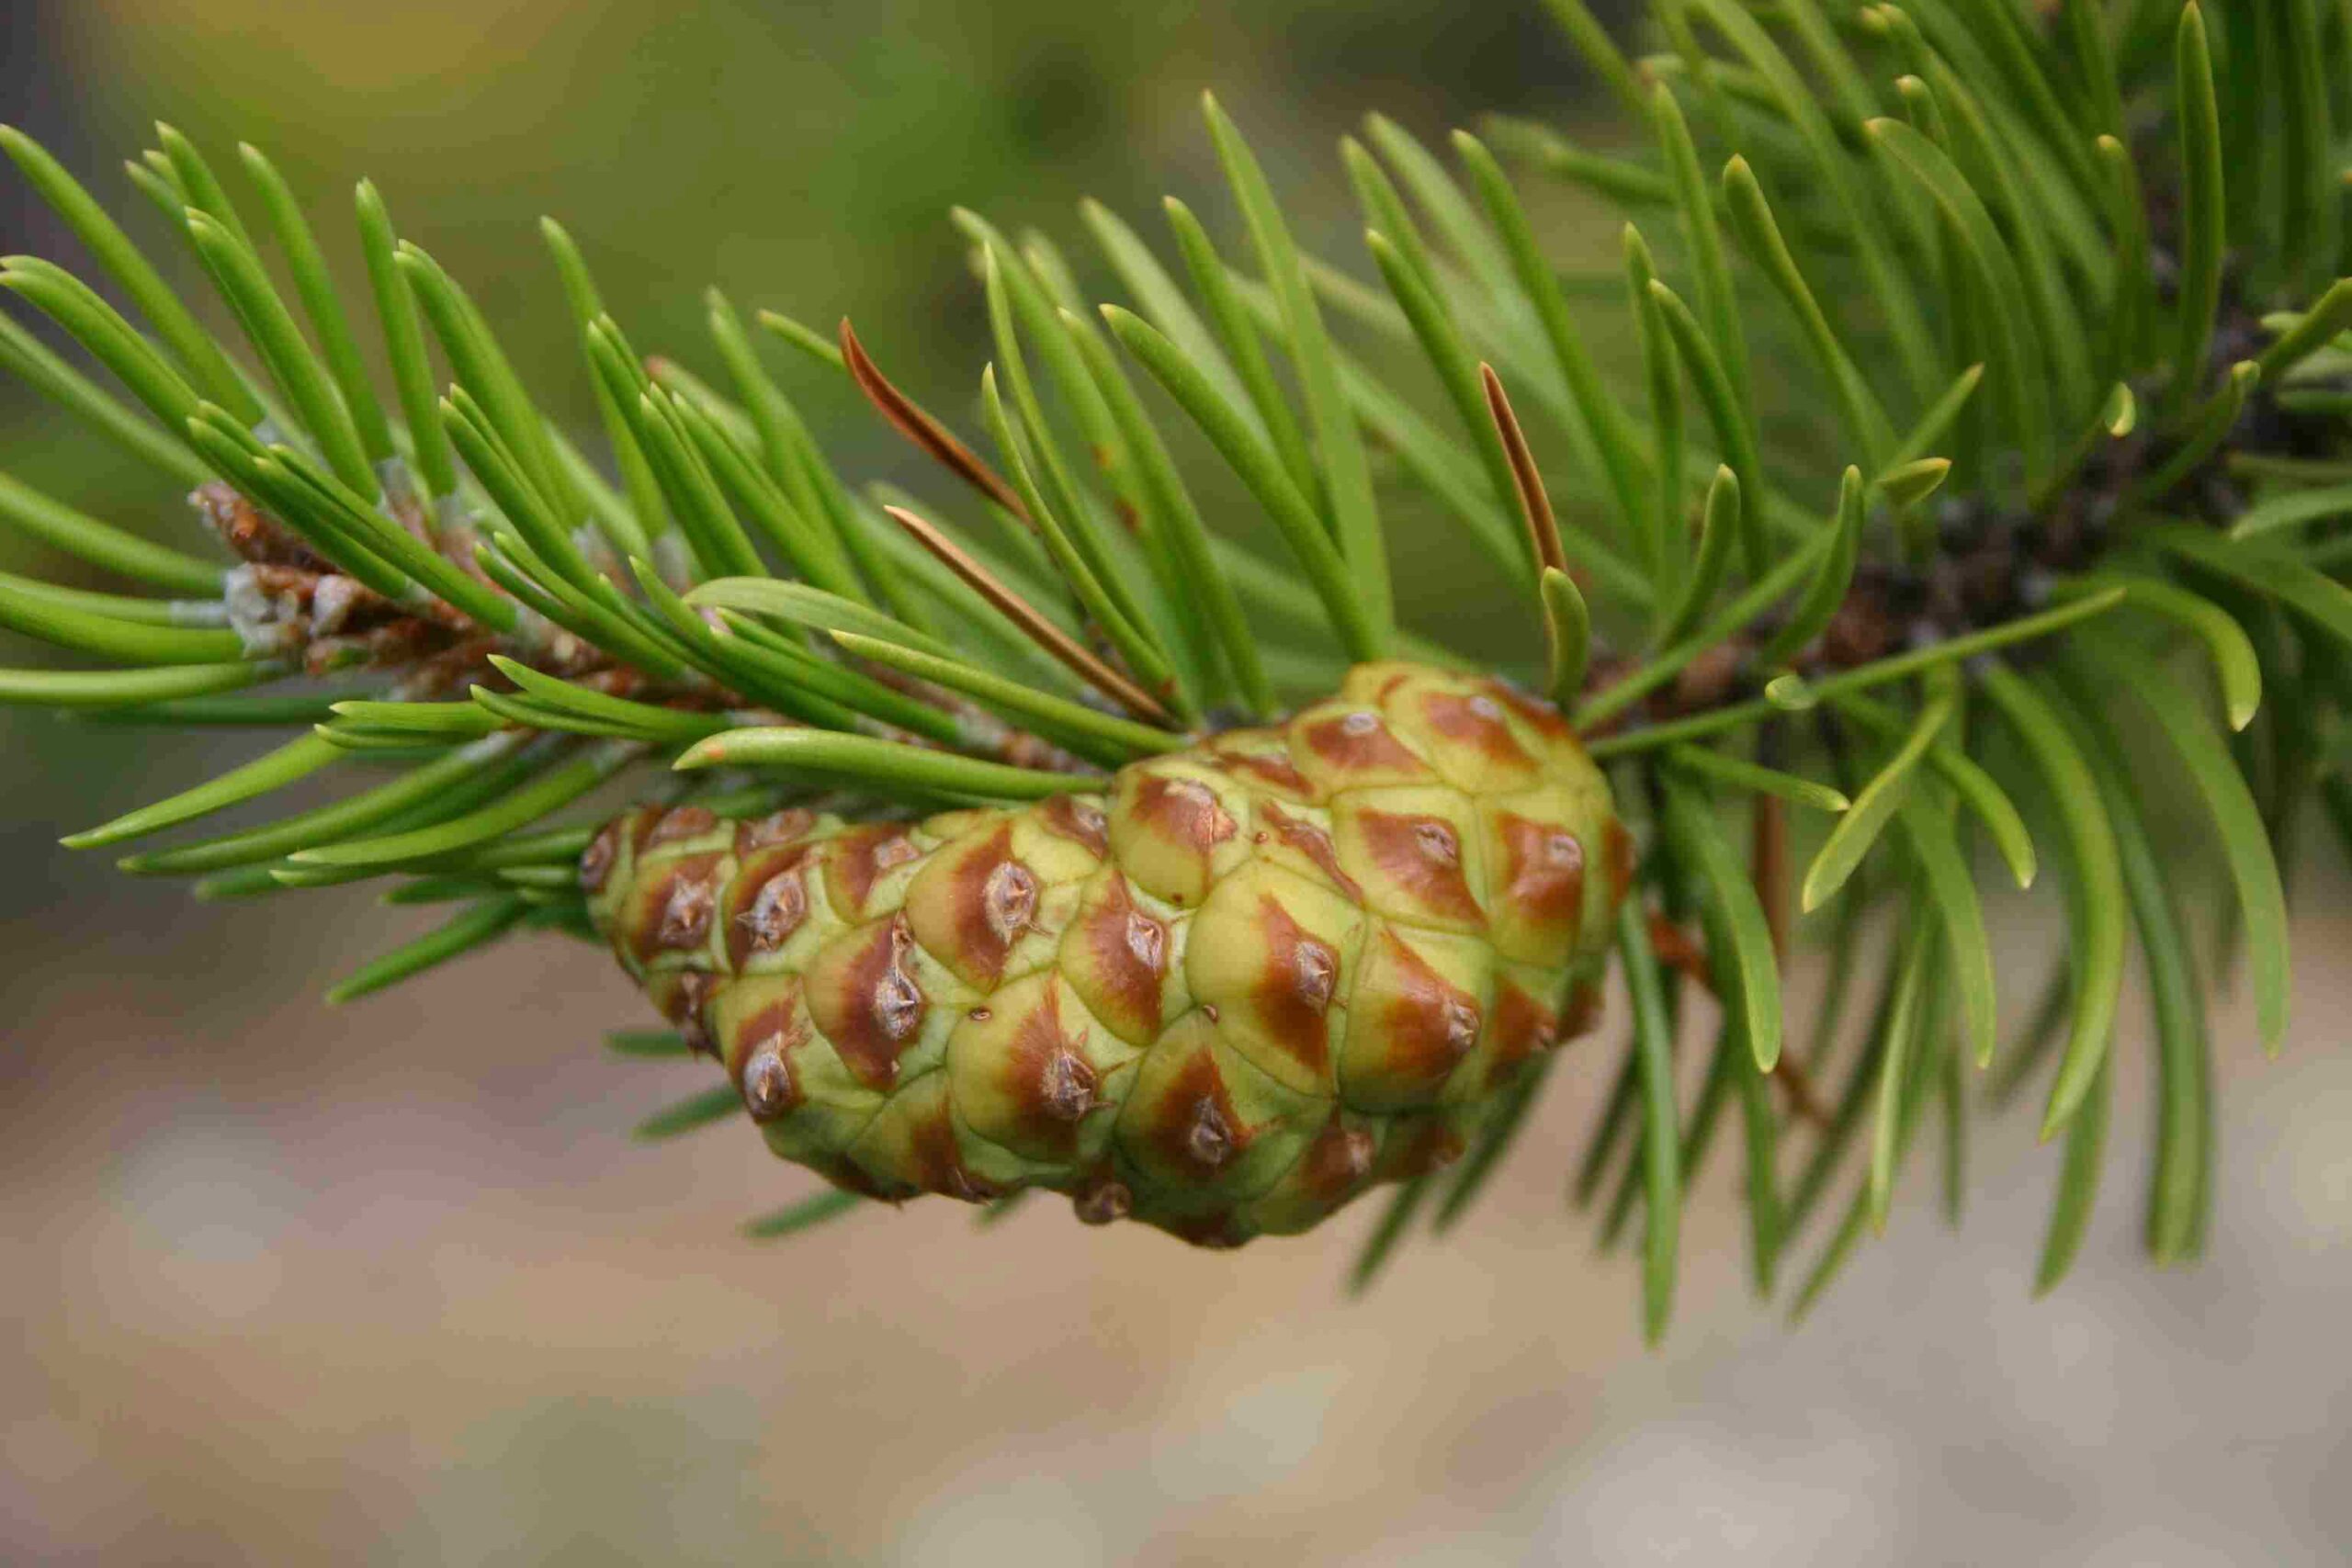 A green cone with brown tips on a conifer tree branch.